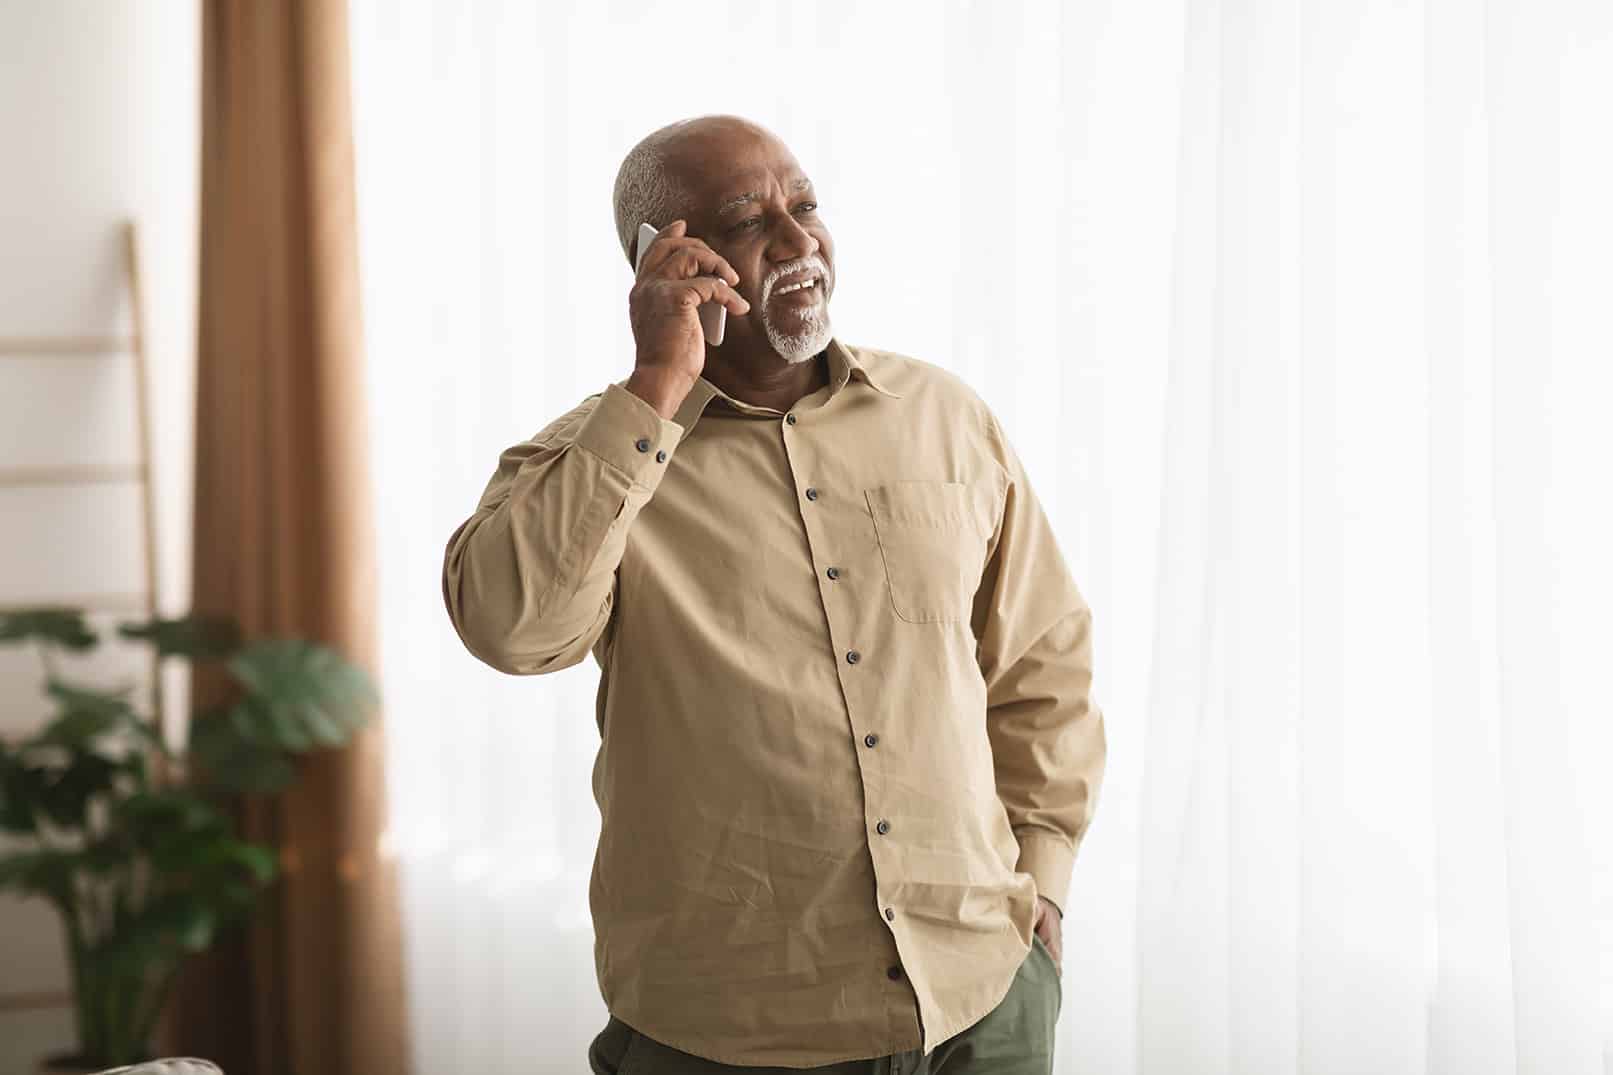 Older adult at home chatting on the phone